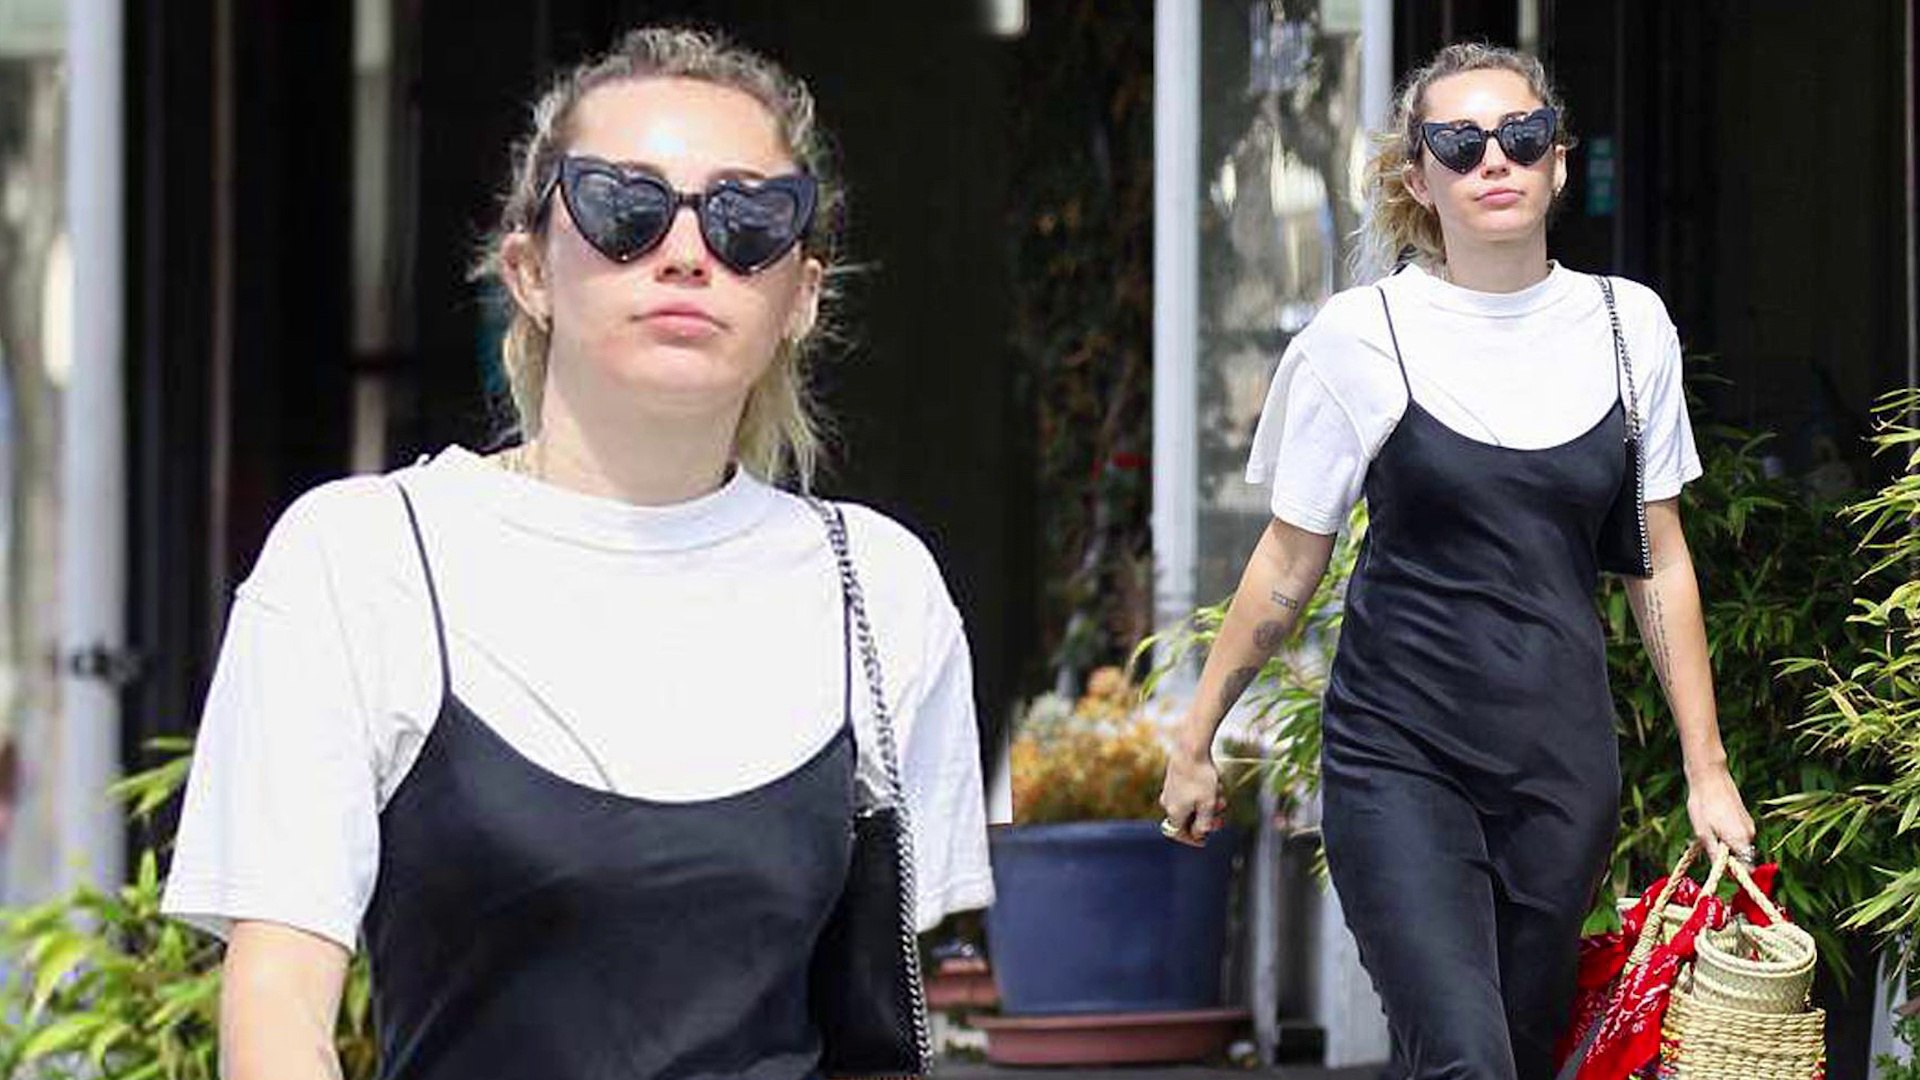 Miley Cyrus looks effortlessly cool in a white top and black slip dress for casual shopping day in S